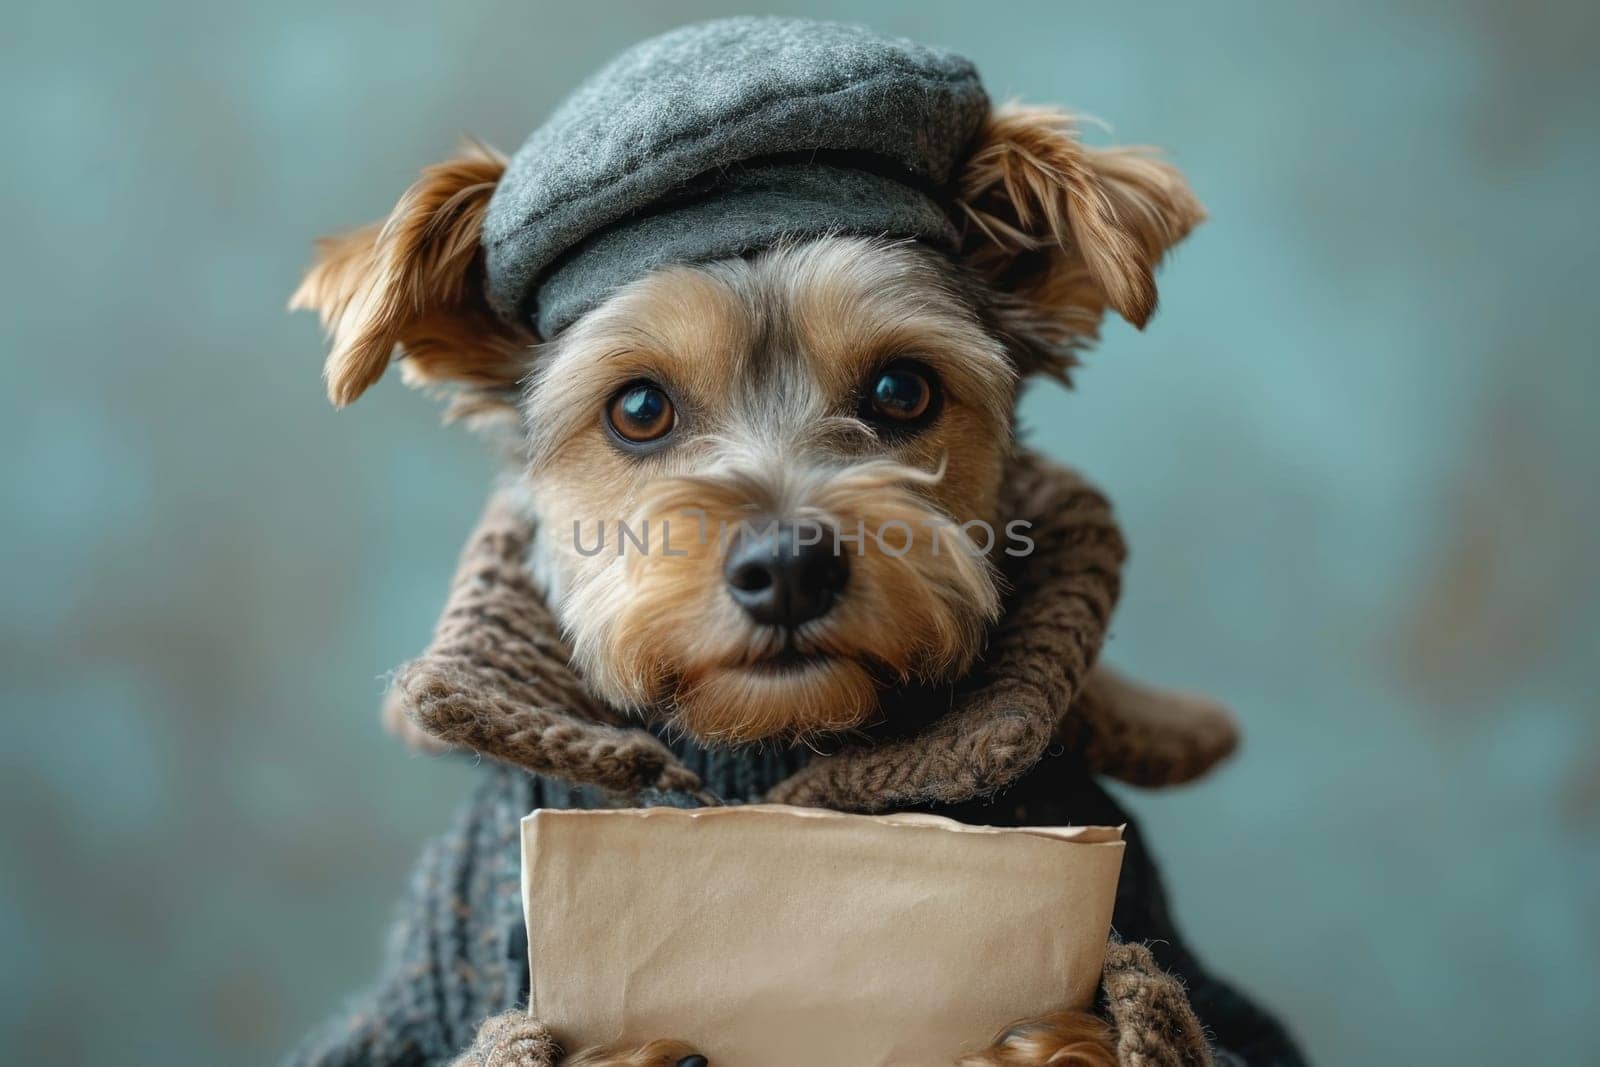 A dog in a hat and clothes reads a letter on a blue background by Lobachad